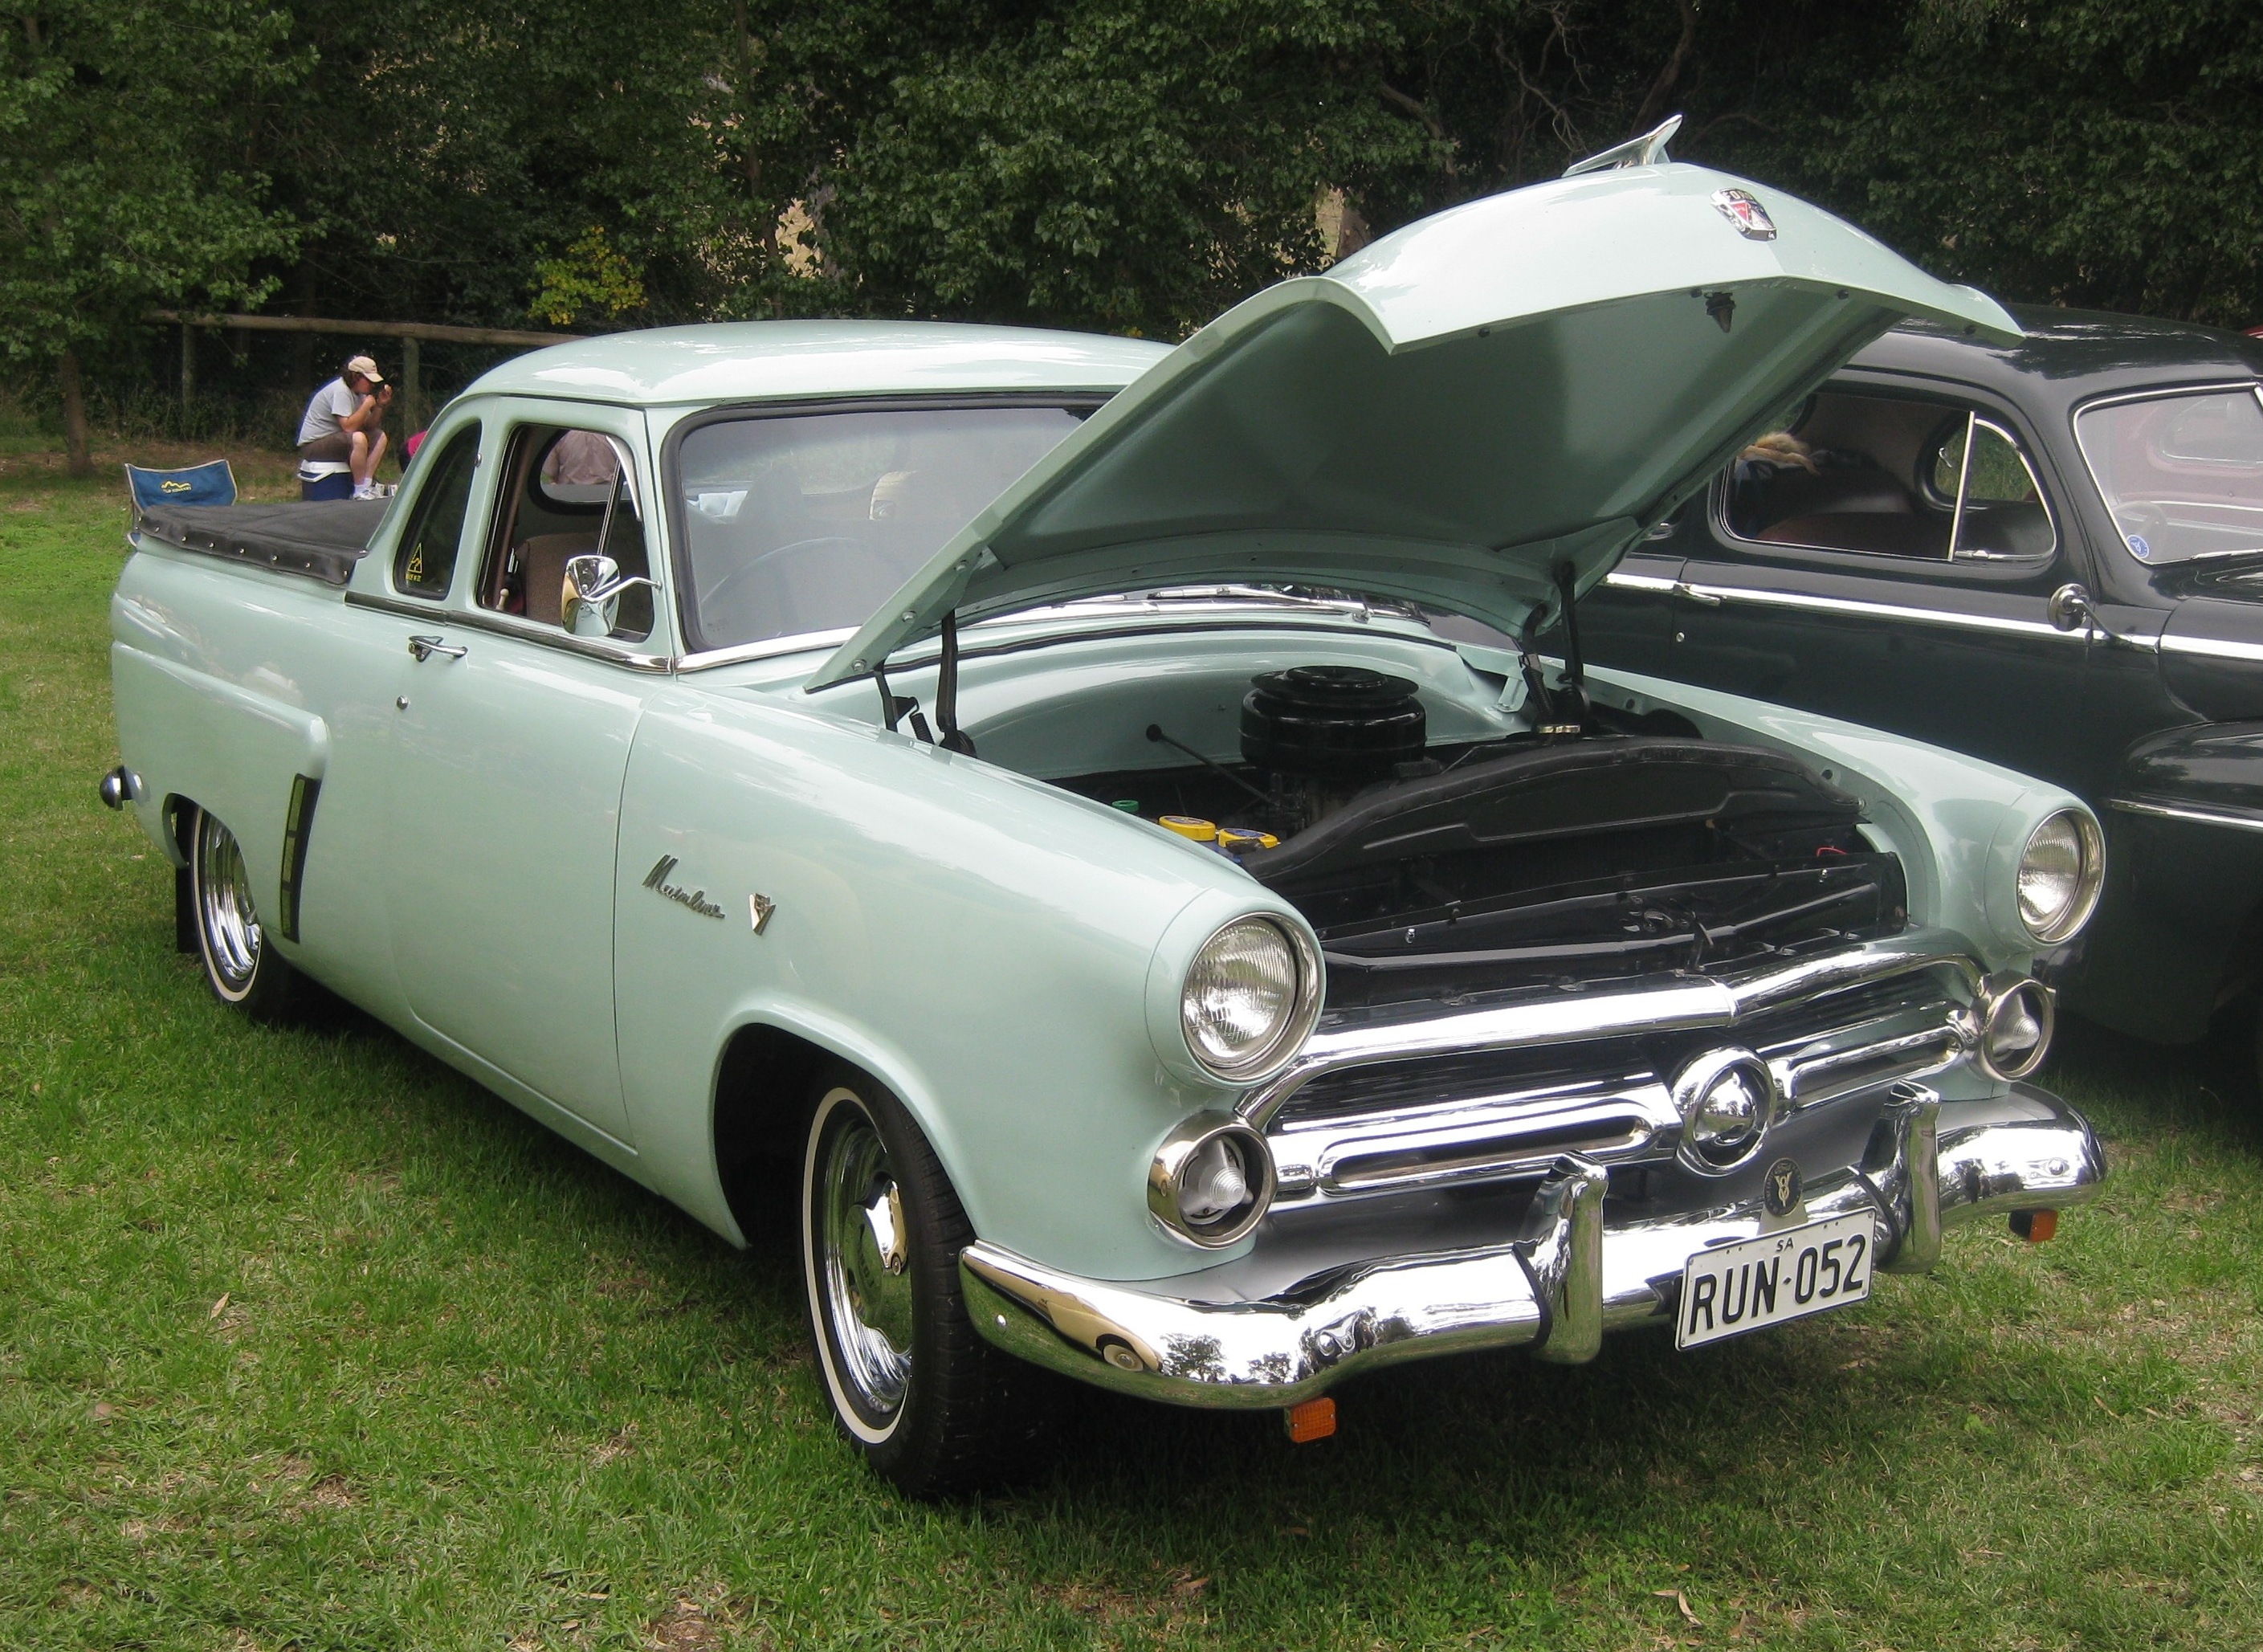 Ford Mainline business coupe